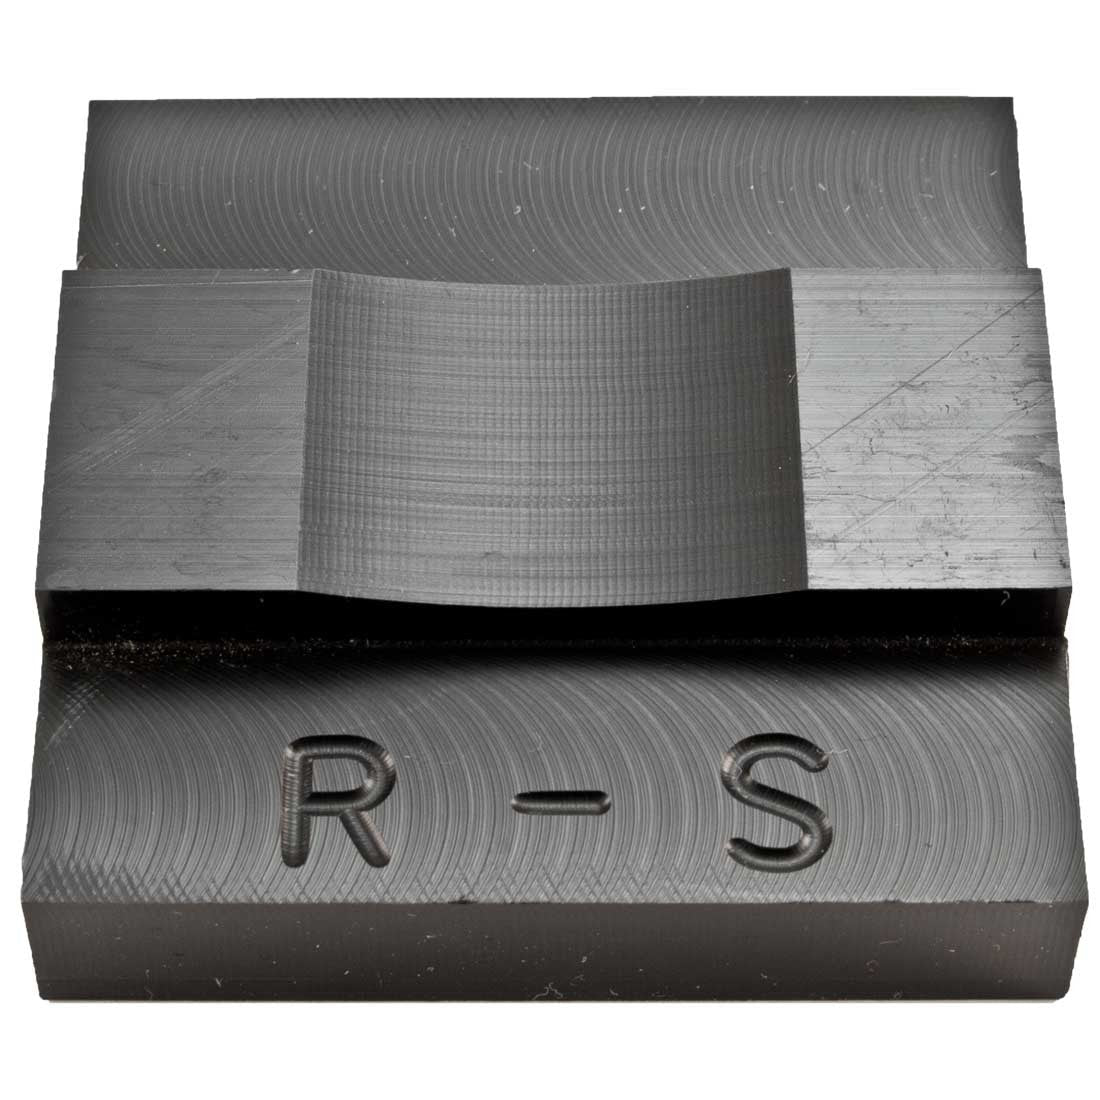 Synthetic Dies for BB Press - Rado Watches (Rectangular/Round)